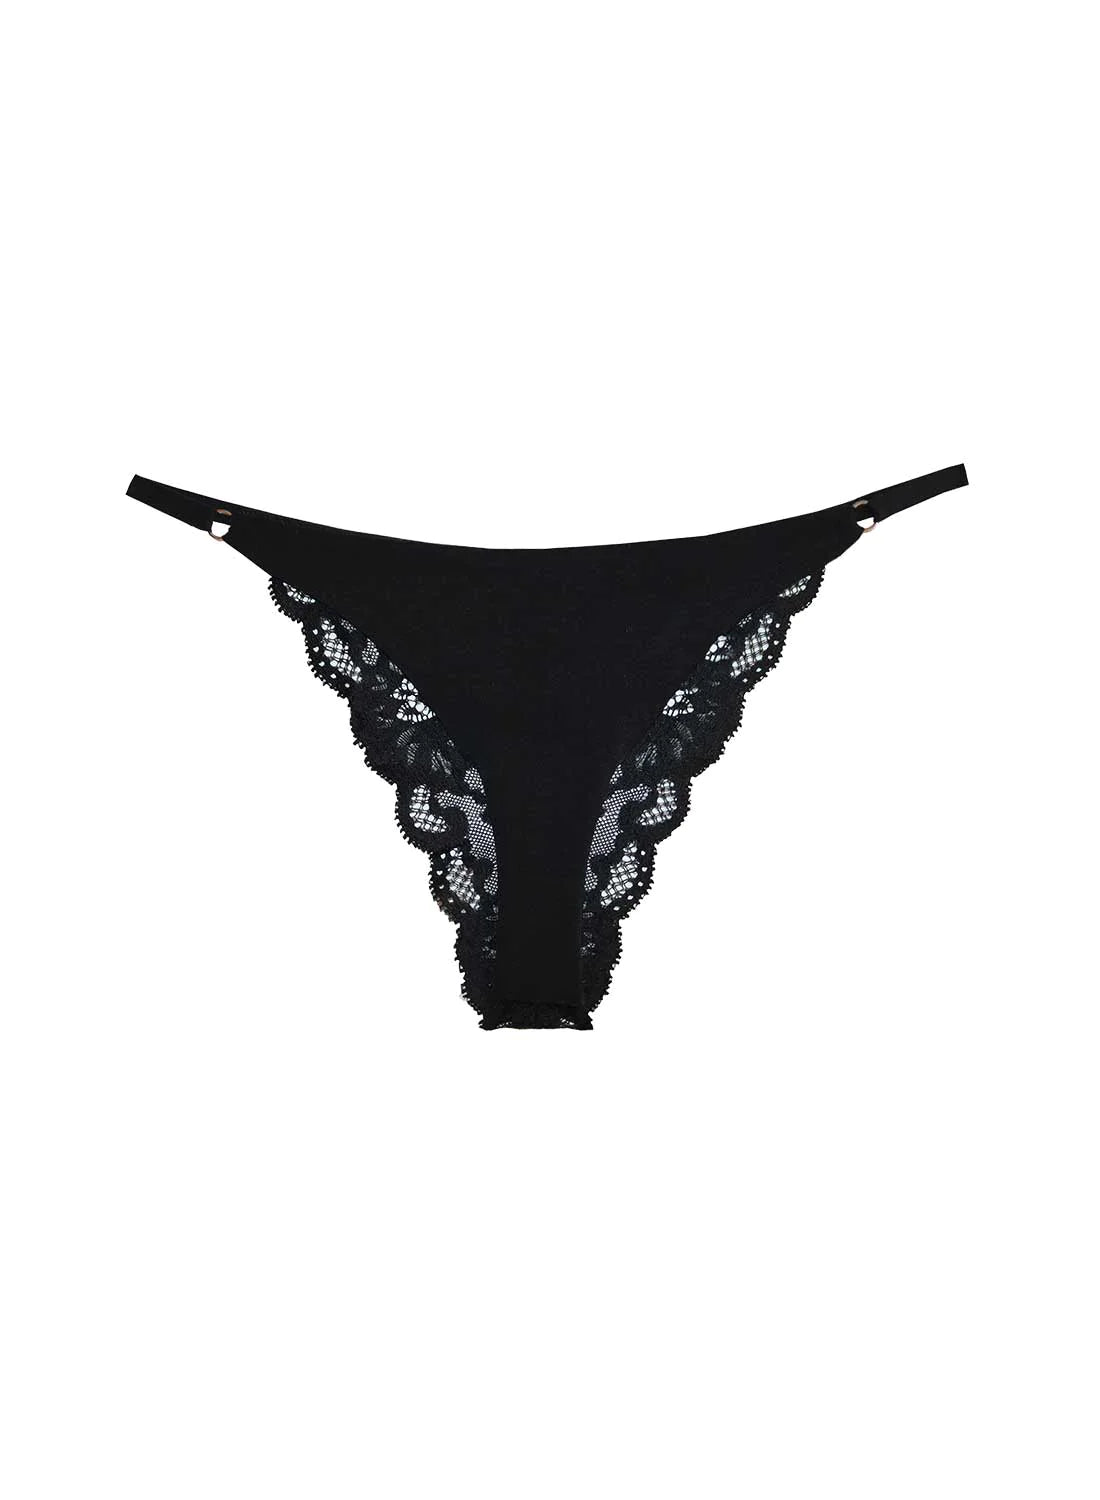 Microfiber and Lace Cheeky Panty - Black